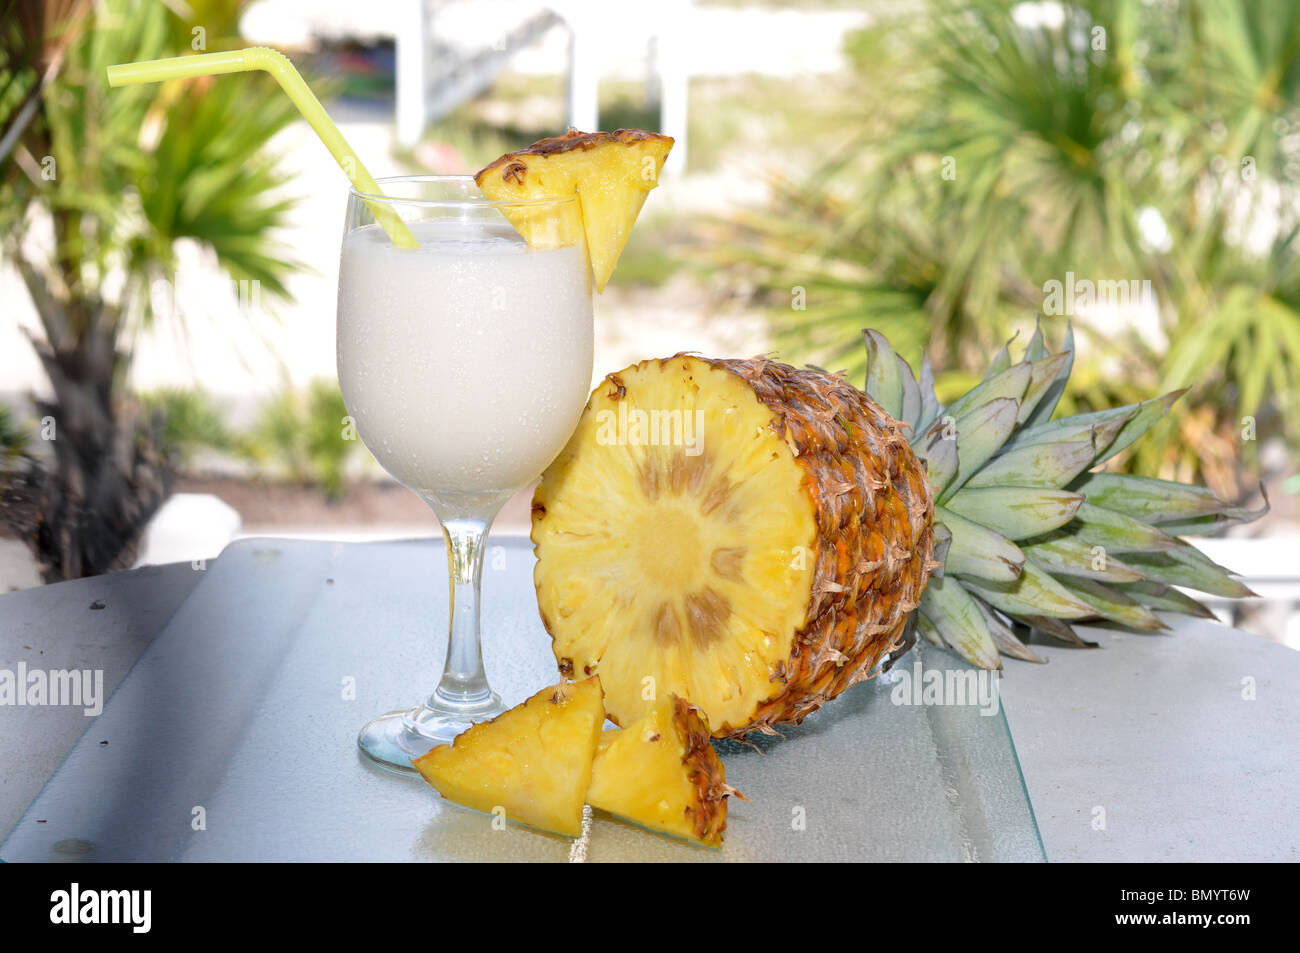 Pina Colada on table with pineapple half and slices. Garnish and straw in glass. Stock Photo